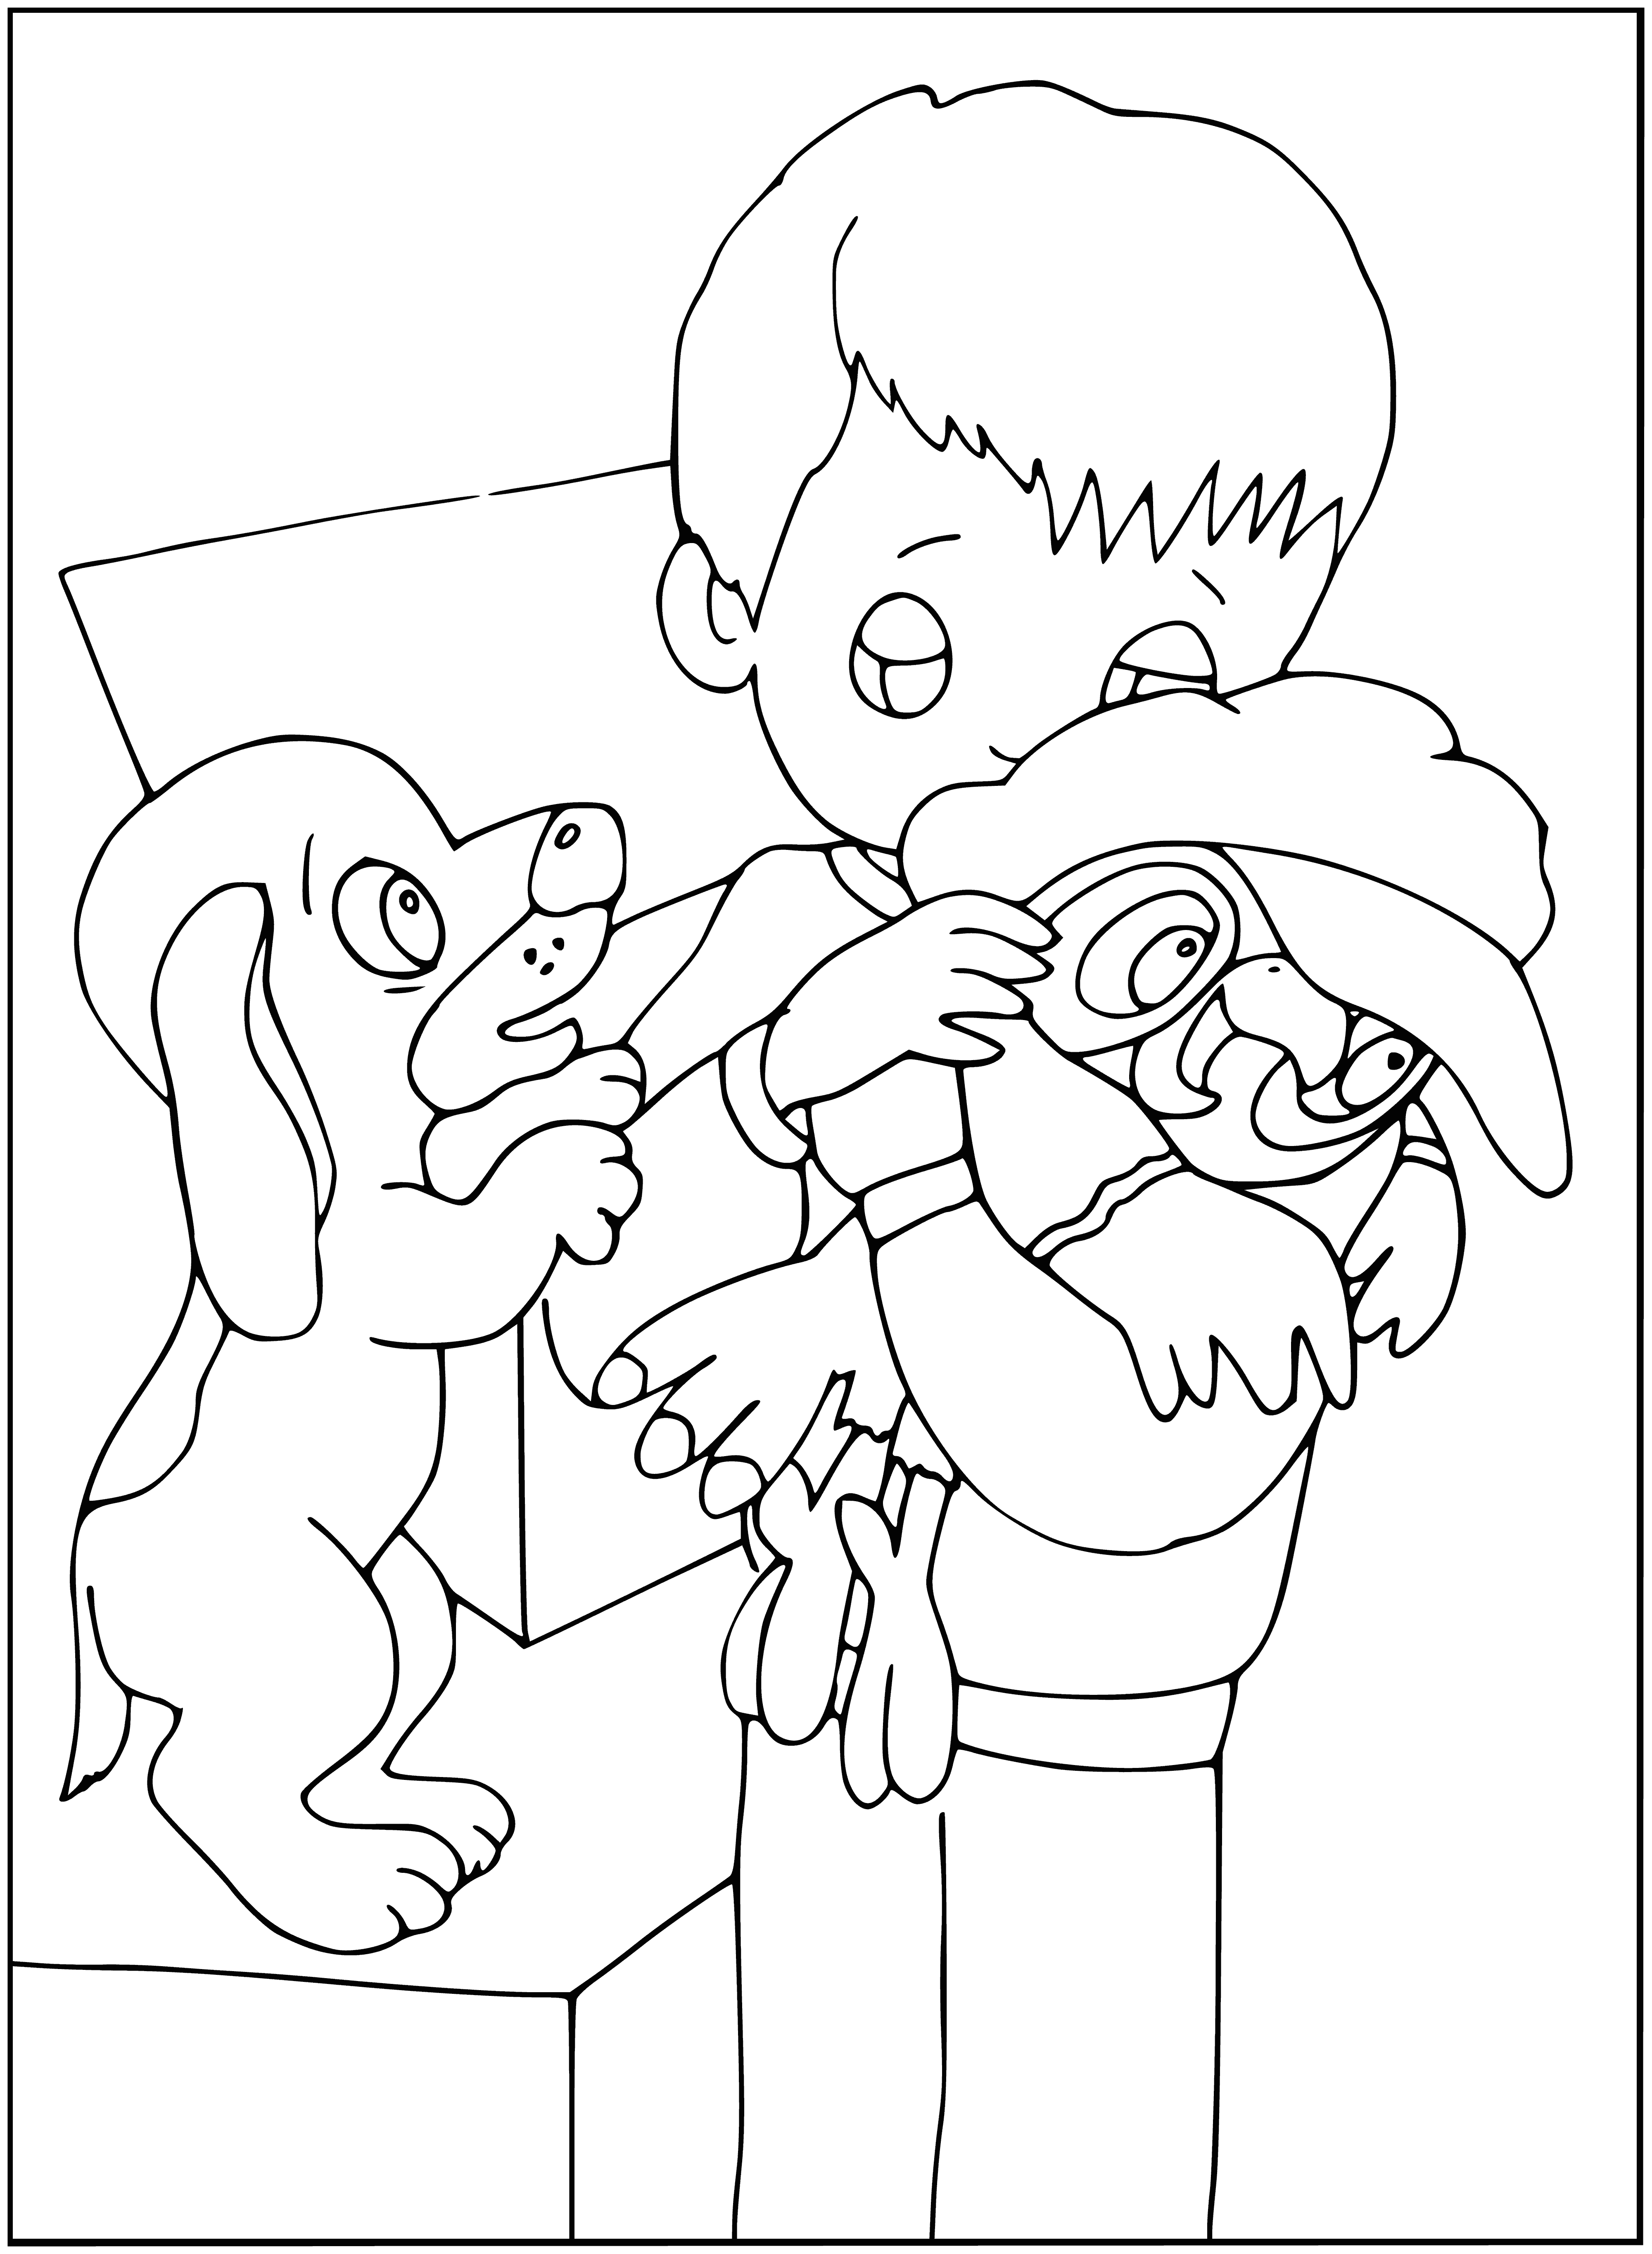 coloring page: A mother bird watches lovingly as her blue eggs hatch a yellow chick.